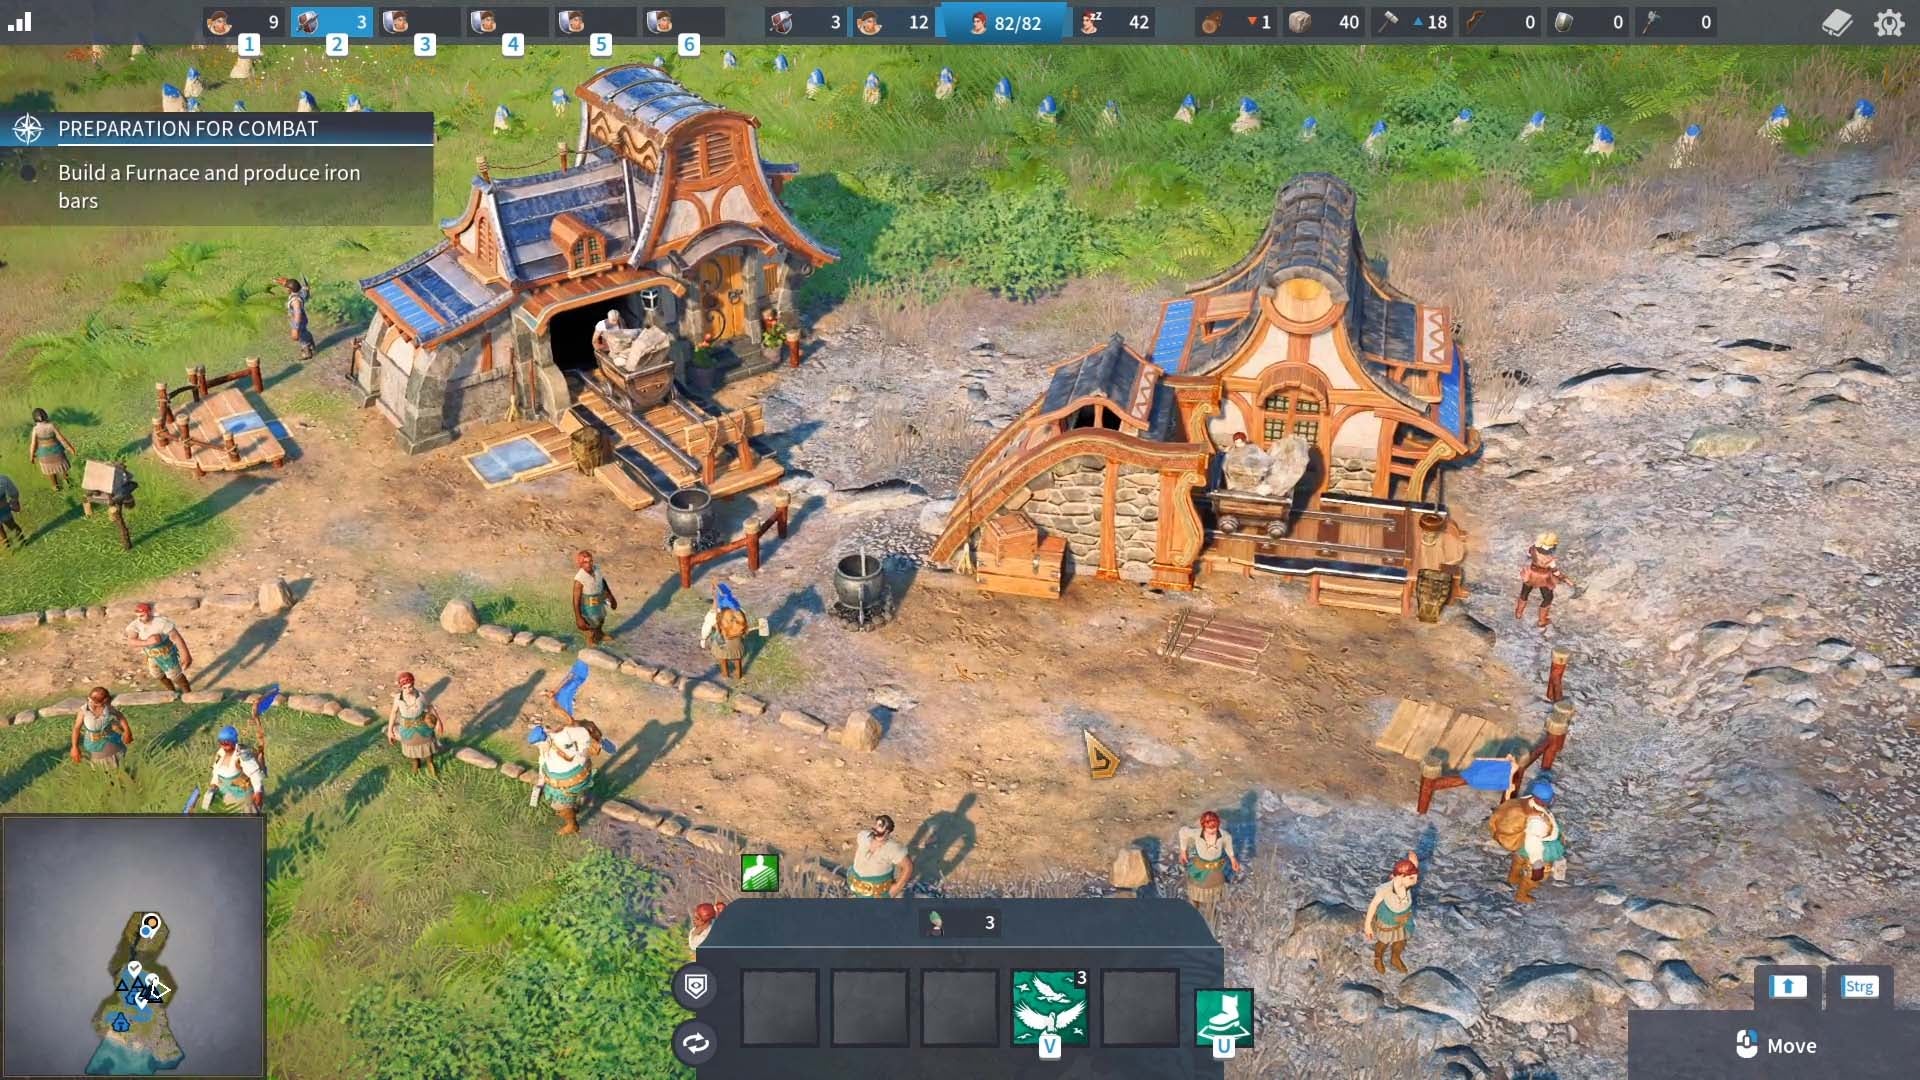 the settlers: new allies test